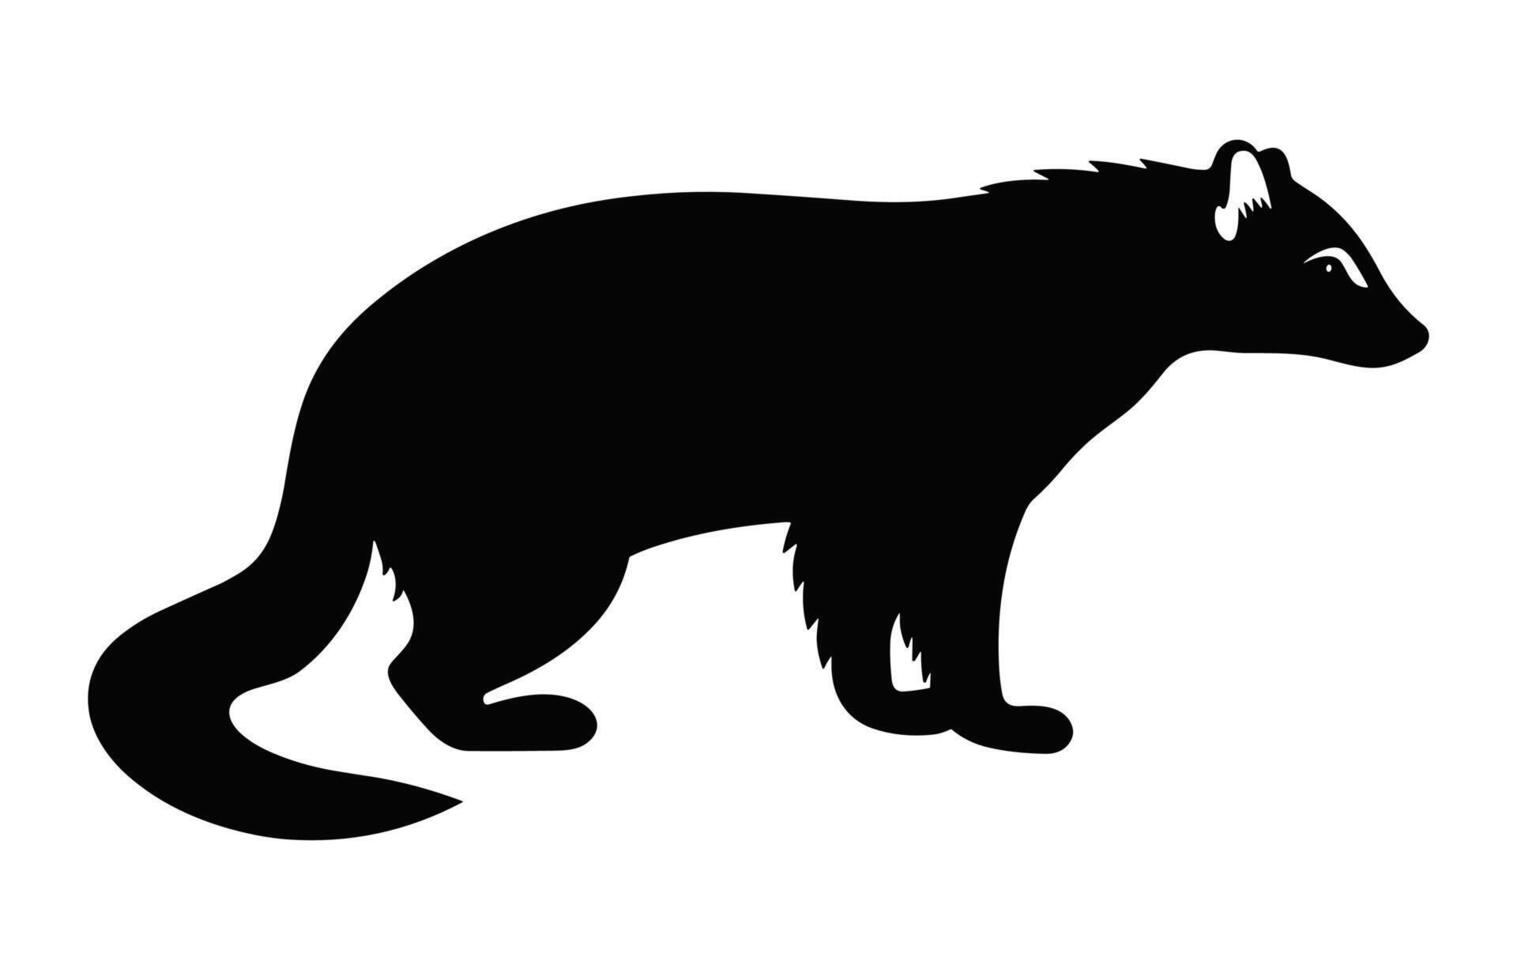 Coati Animal Silhouette Vector isolated on a white background